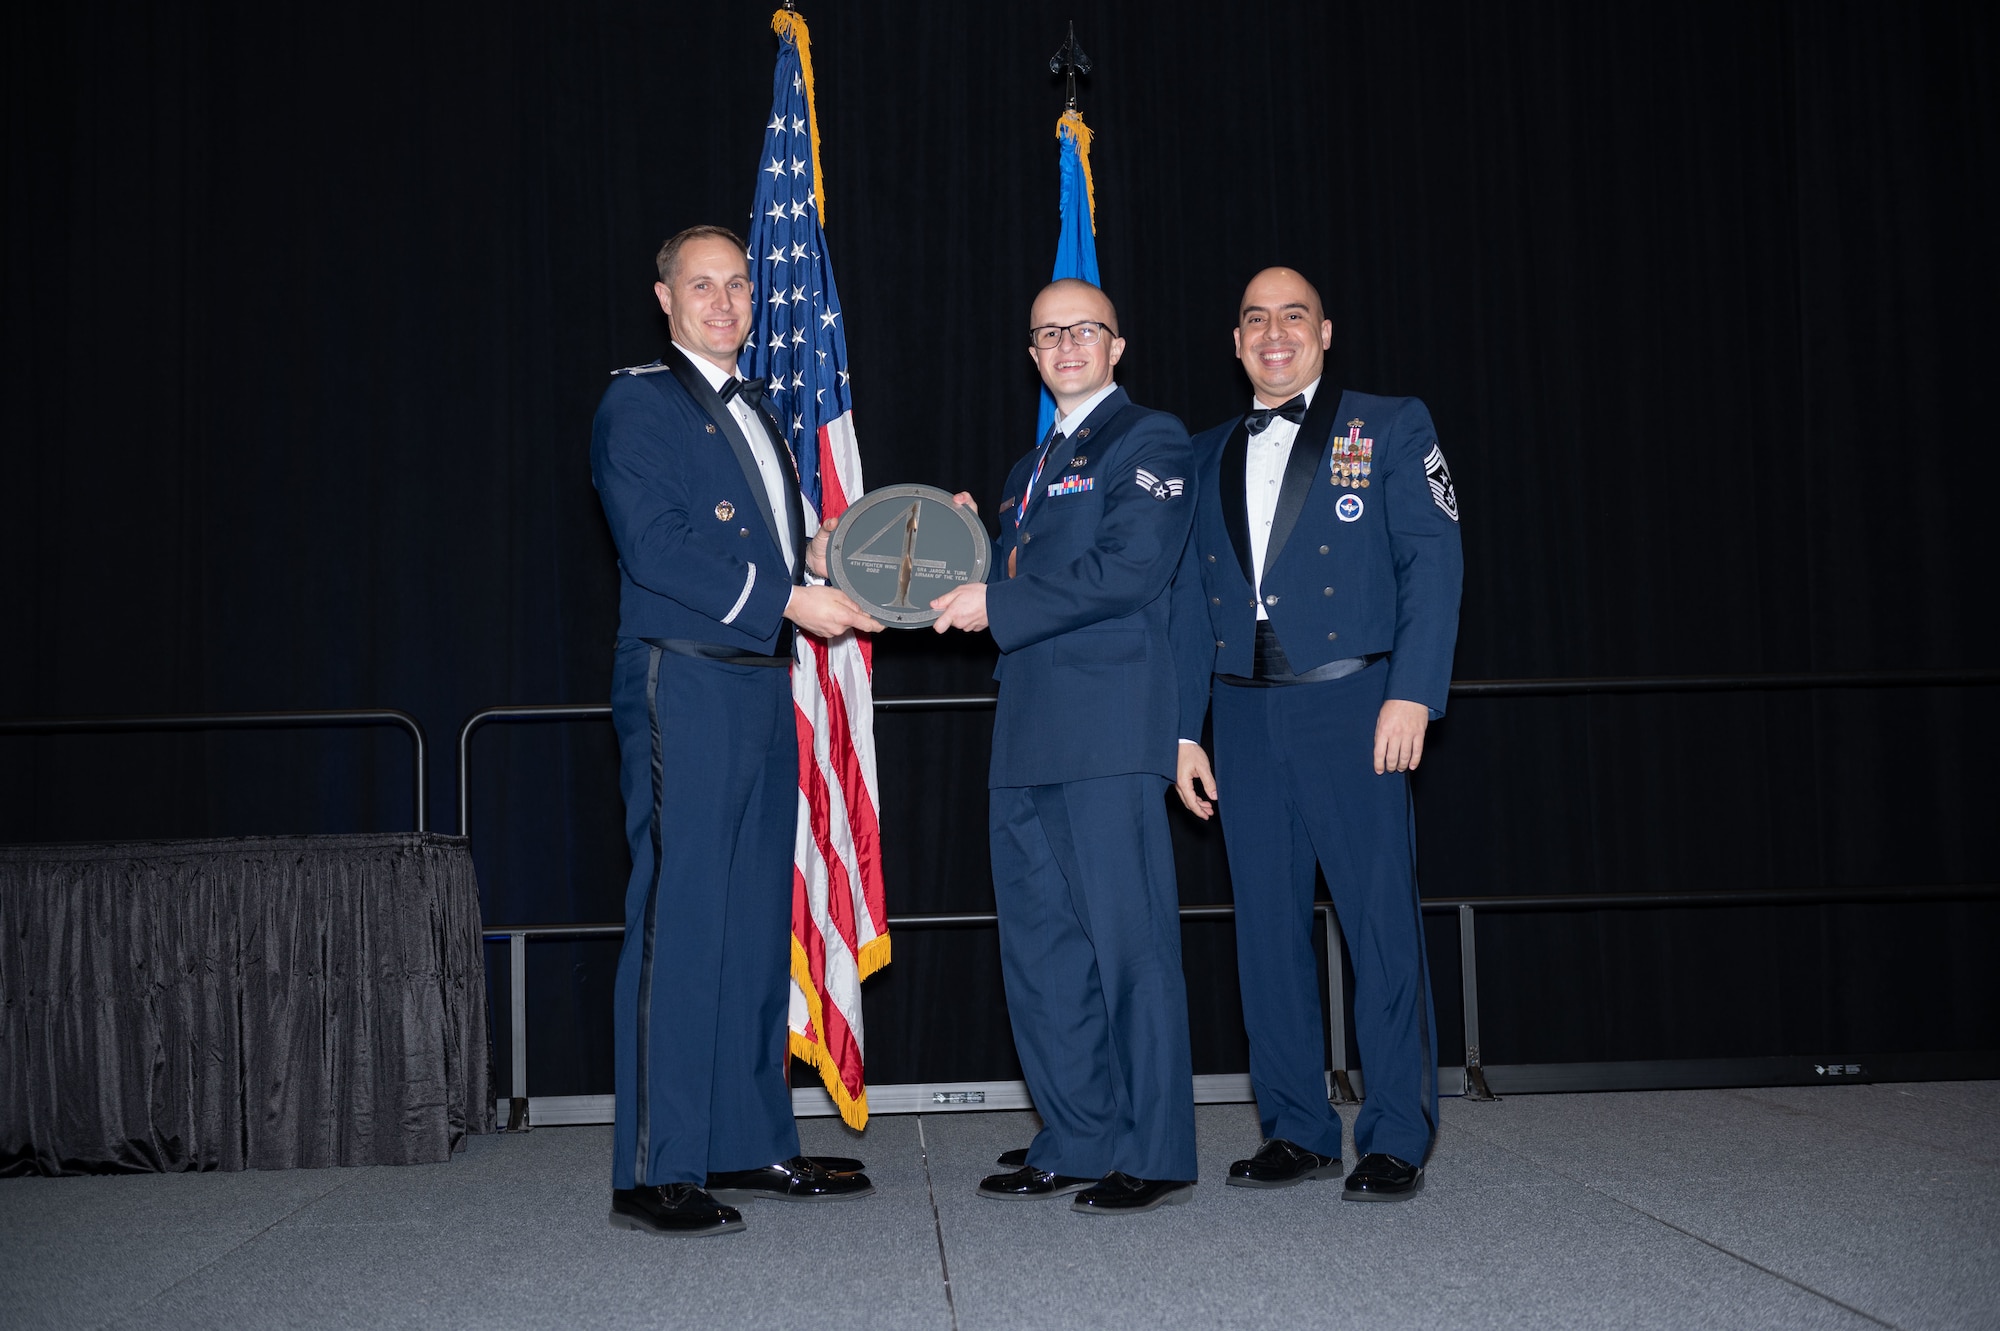 Senior Airman Jarod Turk, center, 4th Mission Support Group fuels equipment maintenance technician, receives the Airman of the Year Award from Col. Lucas Teel, 4th Fighter Wing commander, and Chief Master Sgt. Peter Martinez, 4th FW command chief, during the 2022 Annual Awards ceremony at the Maxwell Center, Goldsboro, North Carolina, Feb. 3, 2023. Annual awards are awarded to Airmen and civilians in 13 different categories, including Volunteer of the Year, senior non-commissioned officer of the year, Key Spouse of the Year, Airman of the Year and more.   (U.S. Air Force photo by Rebecca Sirimarco-Lang)